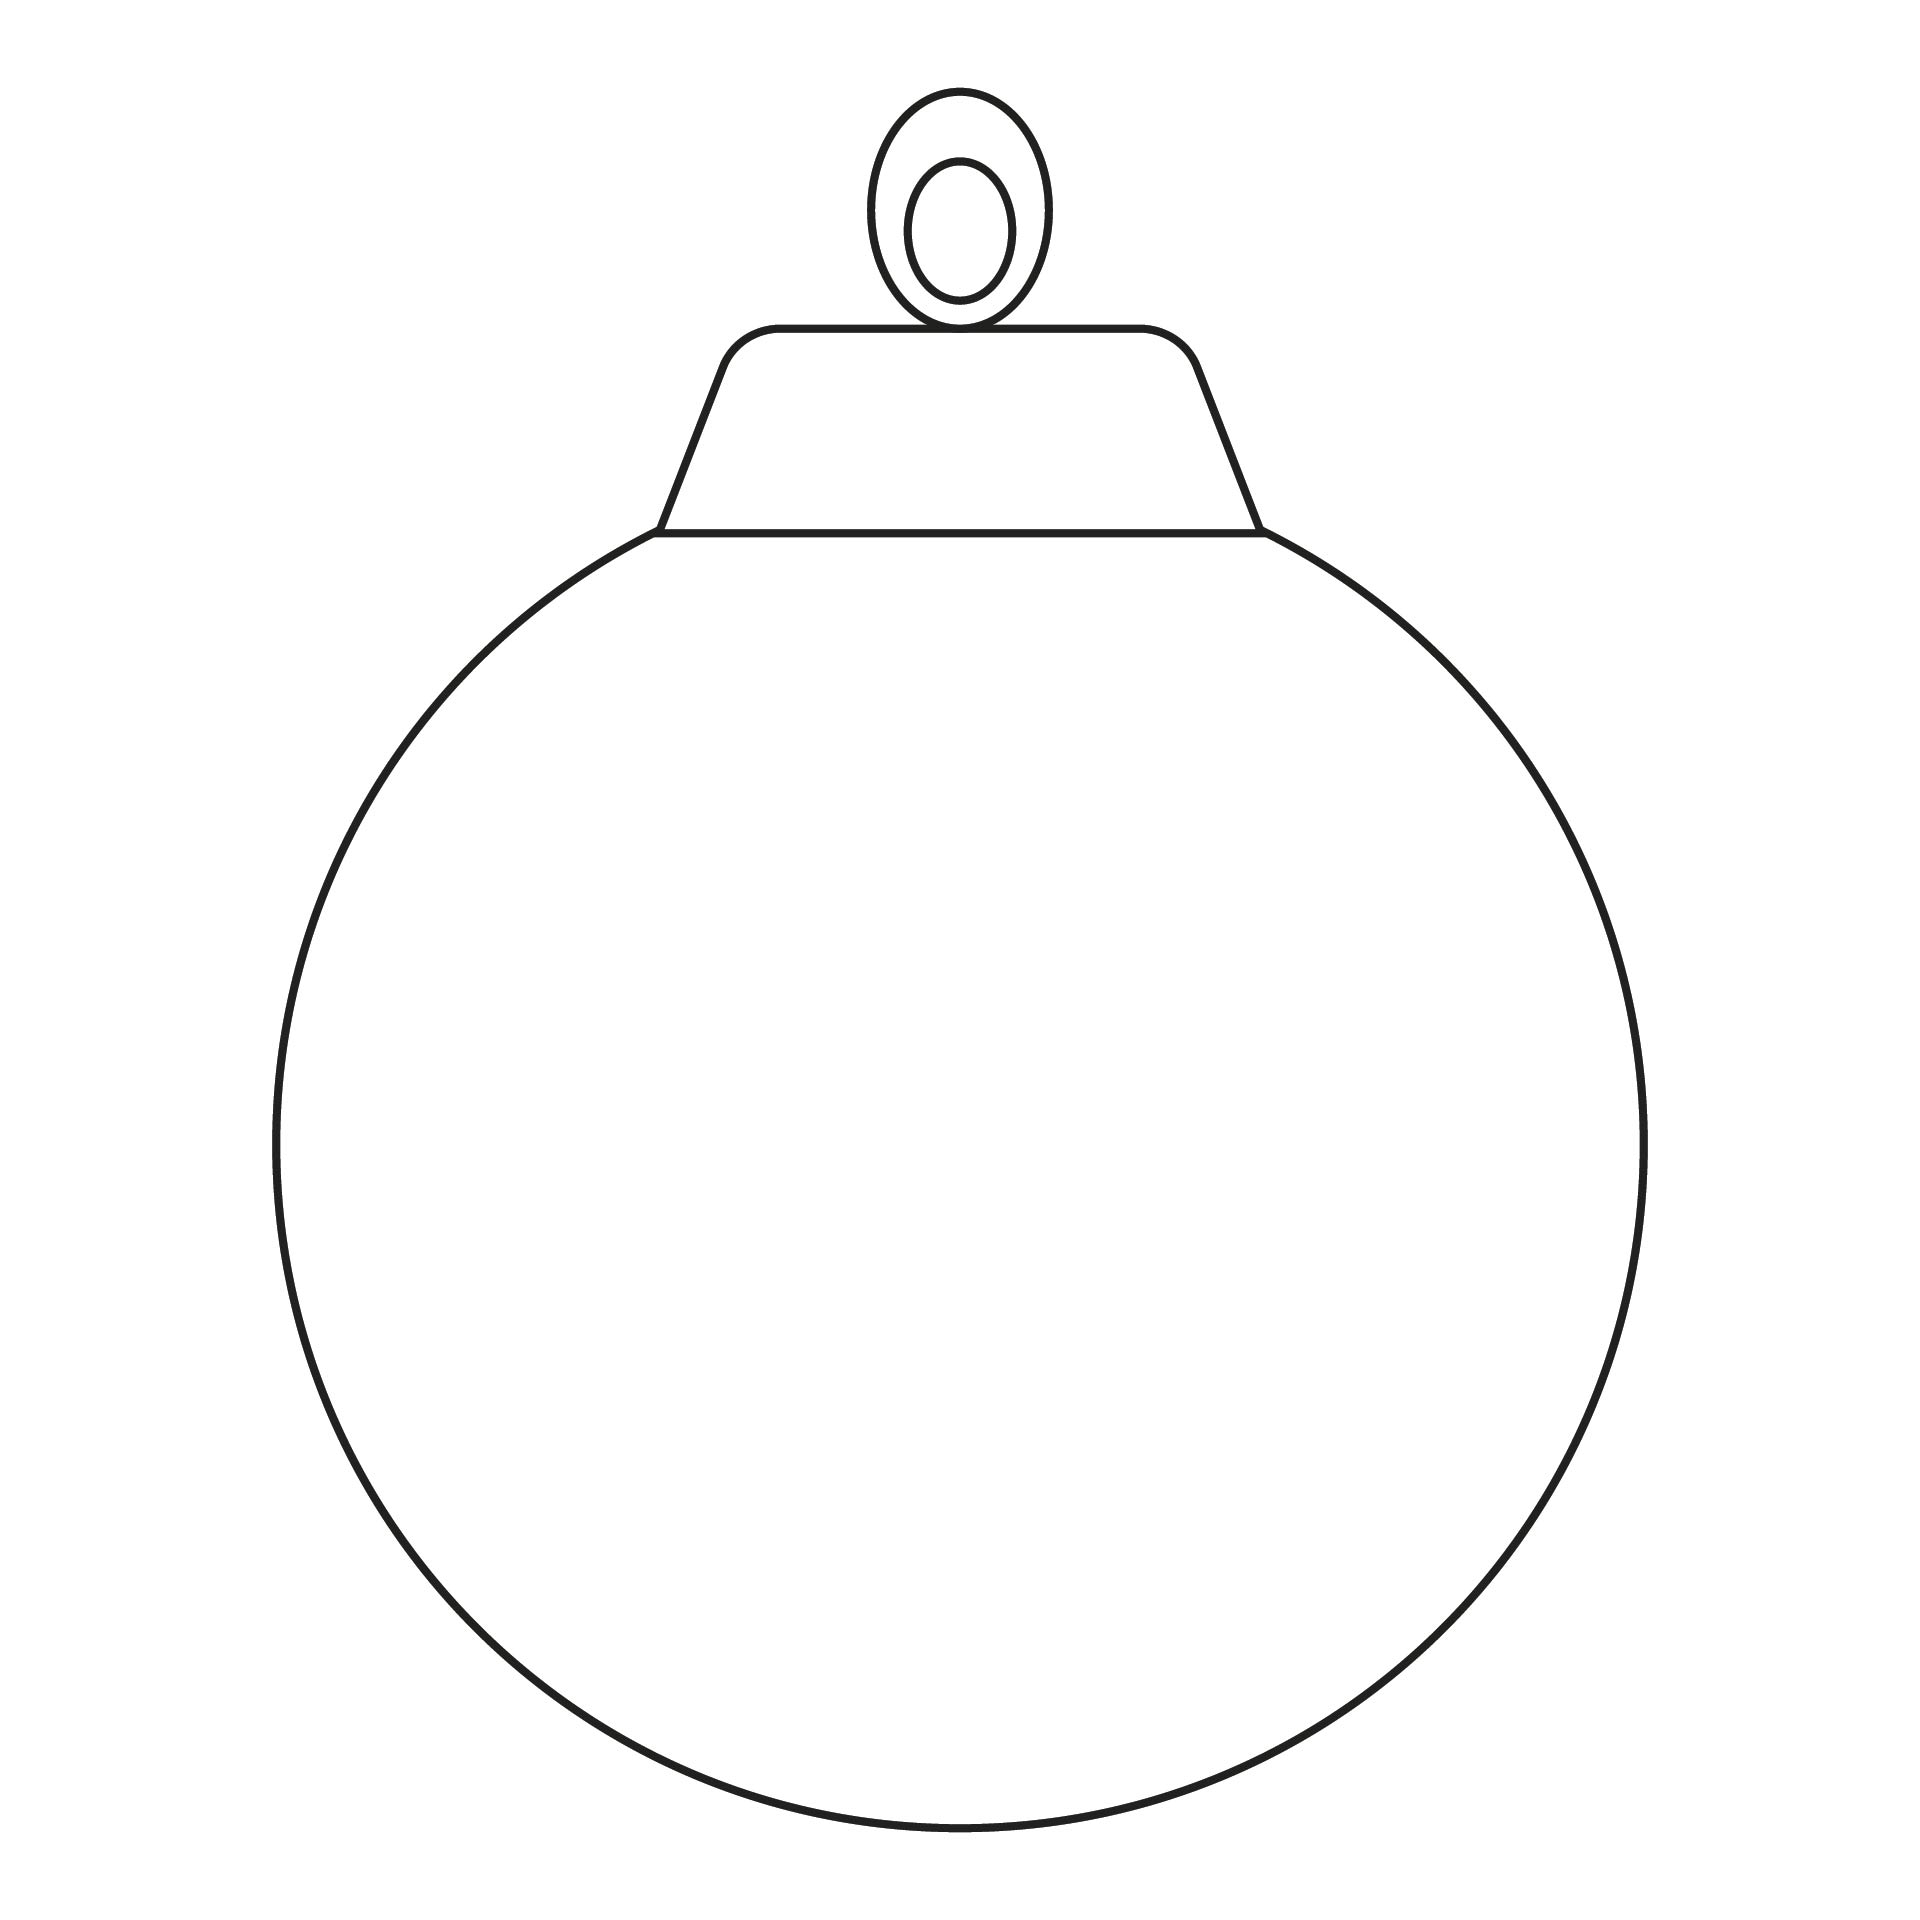 8 Best Images of Ornament Printable Template - Christmas Ball Ornament ...